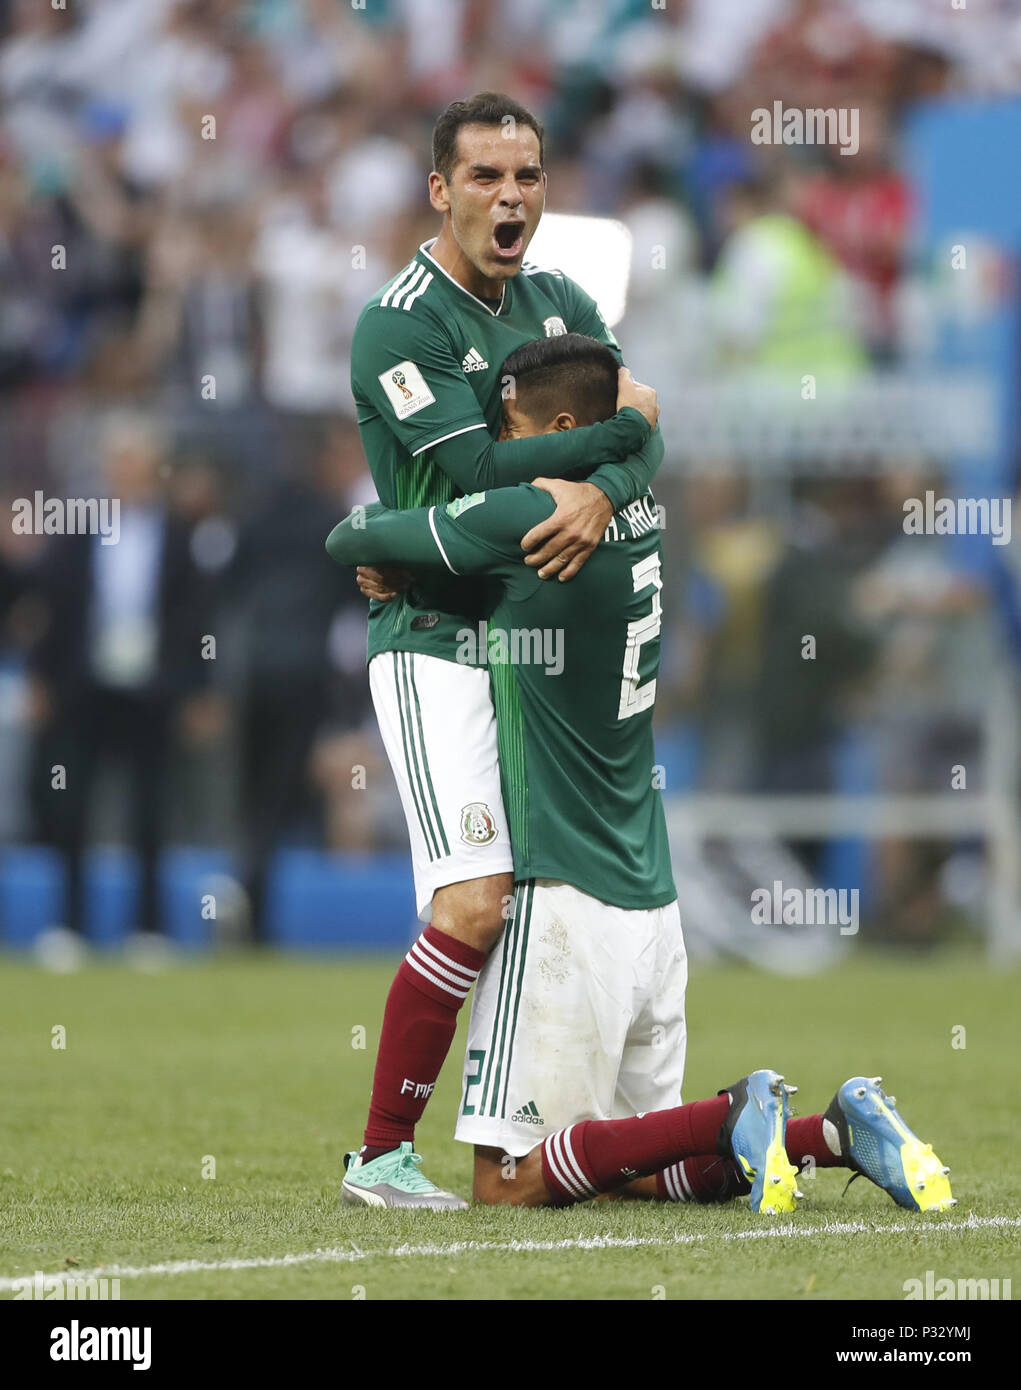 Moscow, Russia. 17th June, 2018. Mexico's Rafael Marquez (L) celebrates victory with his teammate after a group F match between Germany and Mexico at the 2018 FIFA World Cup in Moscow, Russia, June 17, 2018. Mexico won 1-0. Credit: Cao Can/Xinhua/Alamy Live News Stock Photo